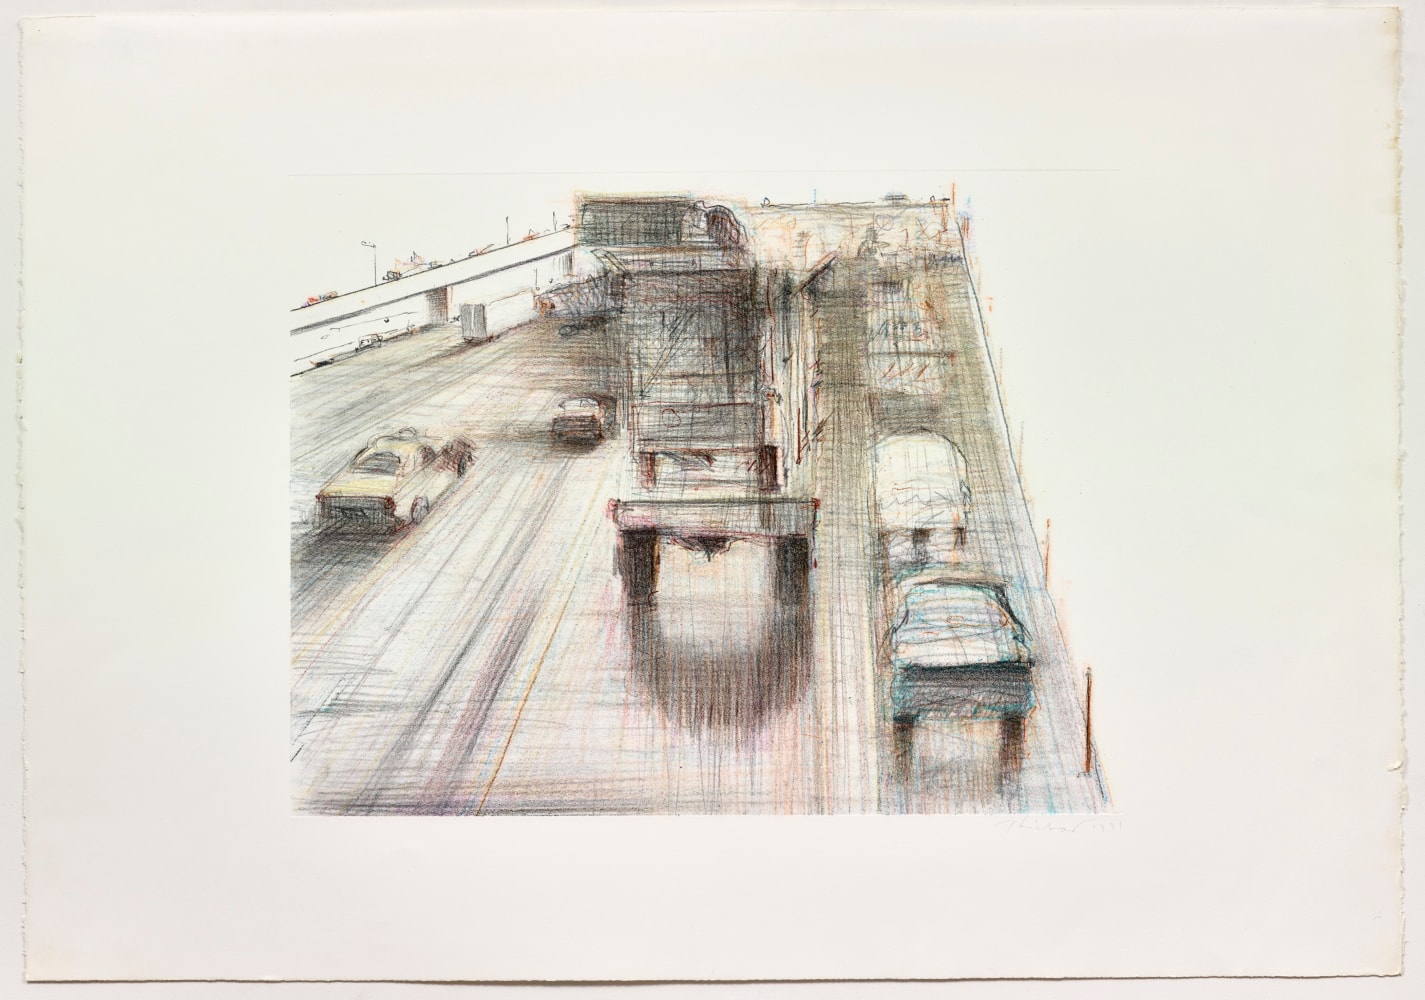 Wayne Thiebaud
Untitled (Cars and Trucks), 1991
watercolor pencil monotype
20 x 25 3/4 in. [image]; 30 x 42 3/4 in. [sheet]

&amp;nbsp;